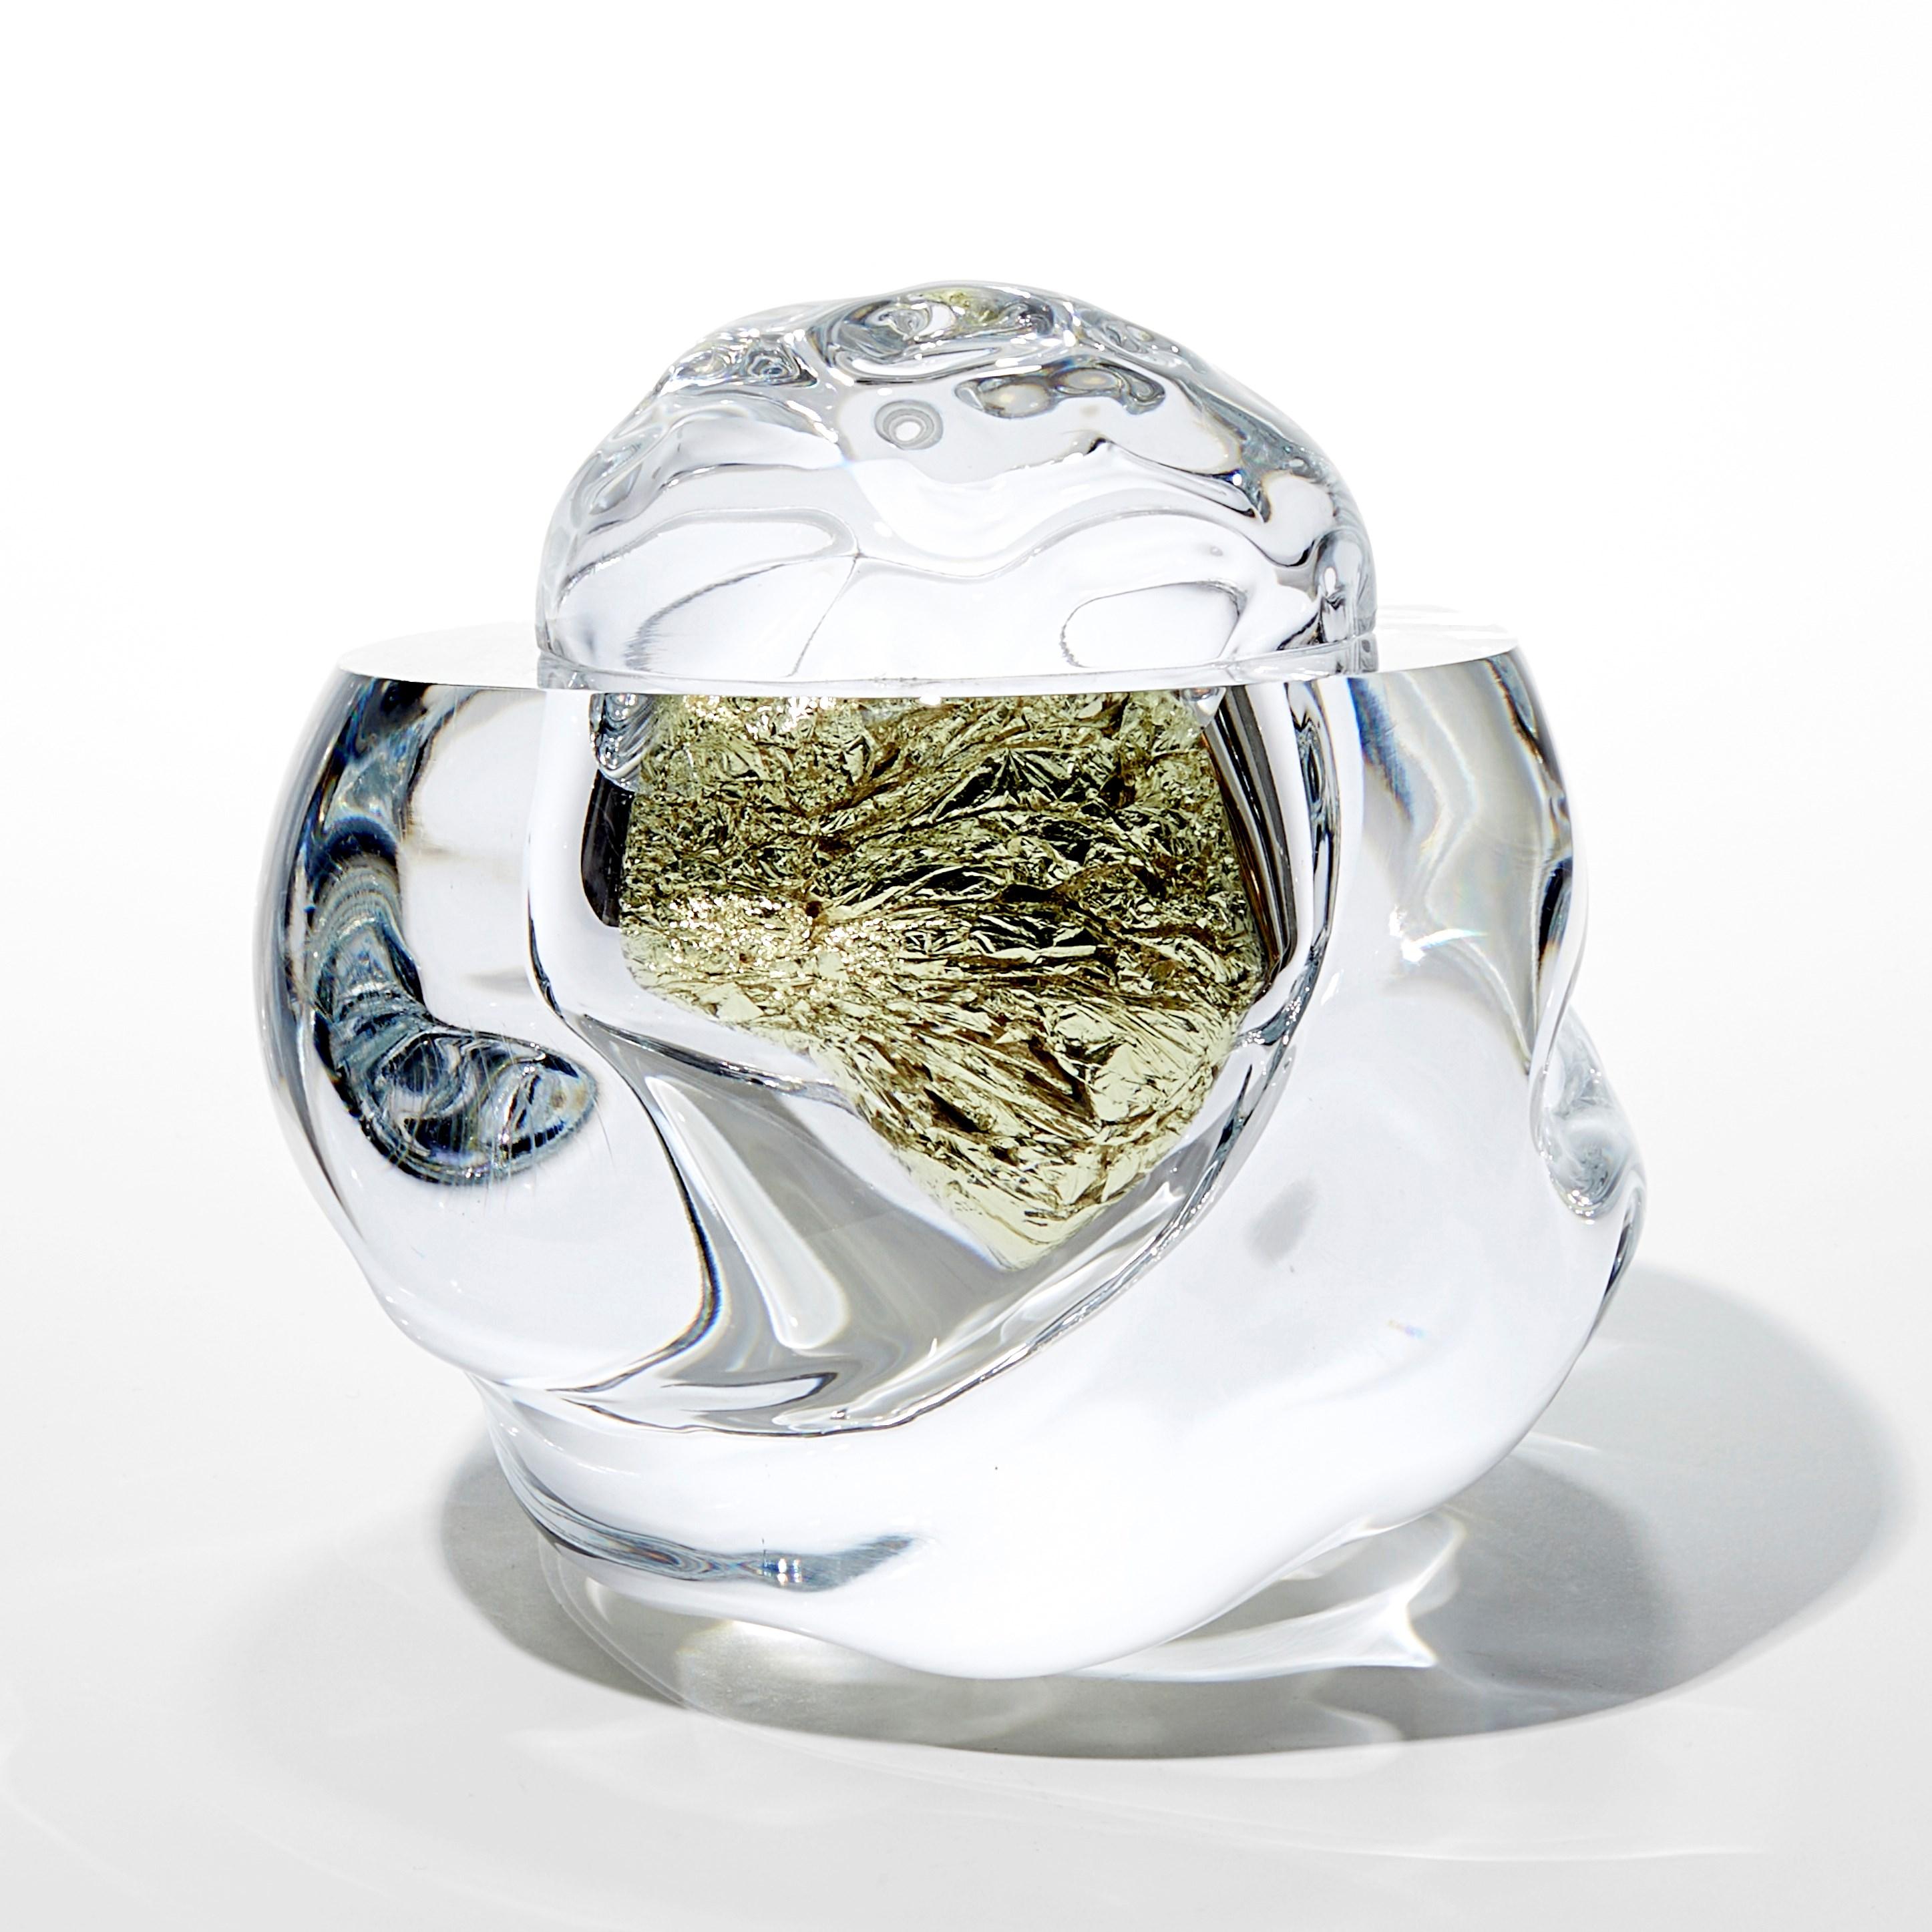 British Erratic J with 18ct Green Gold, amorphic optical glass artwork by Anthony Scala